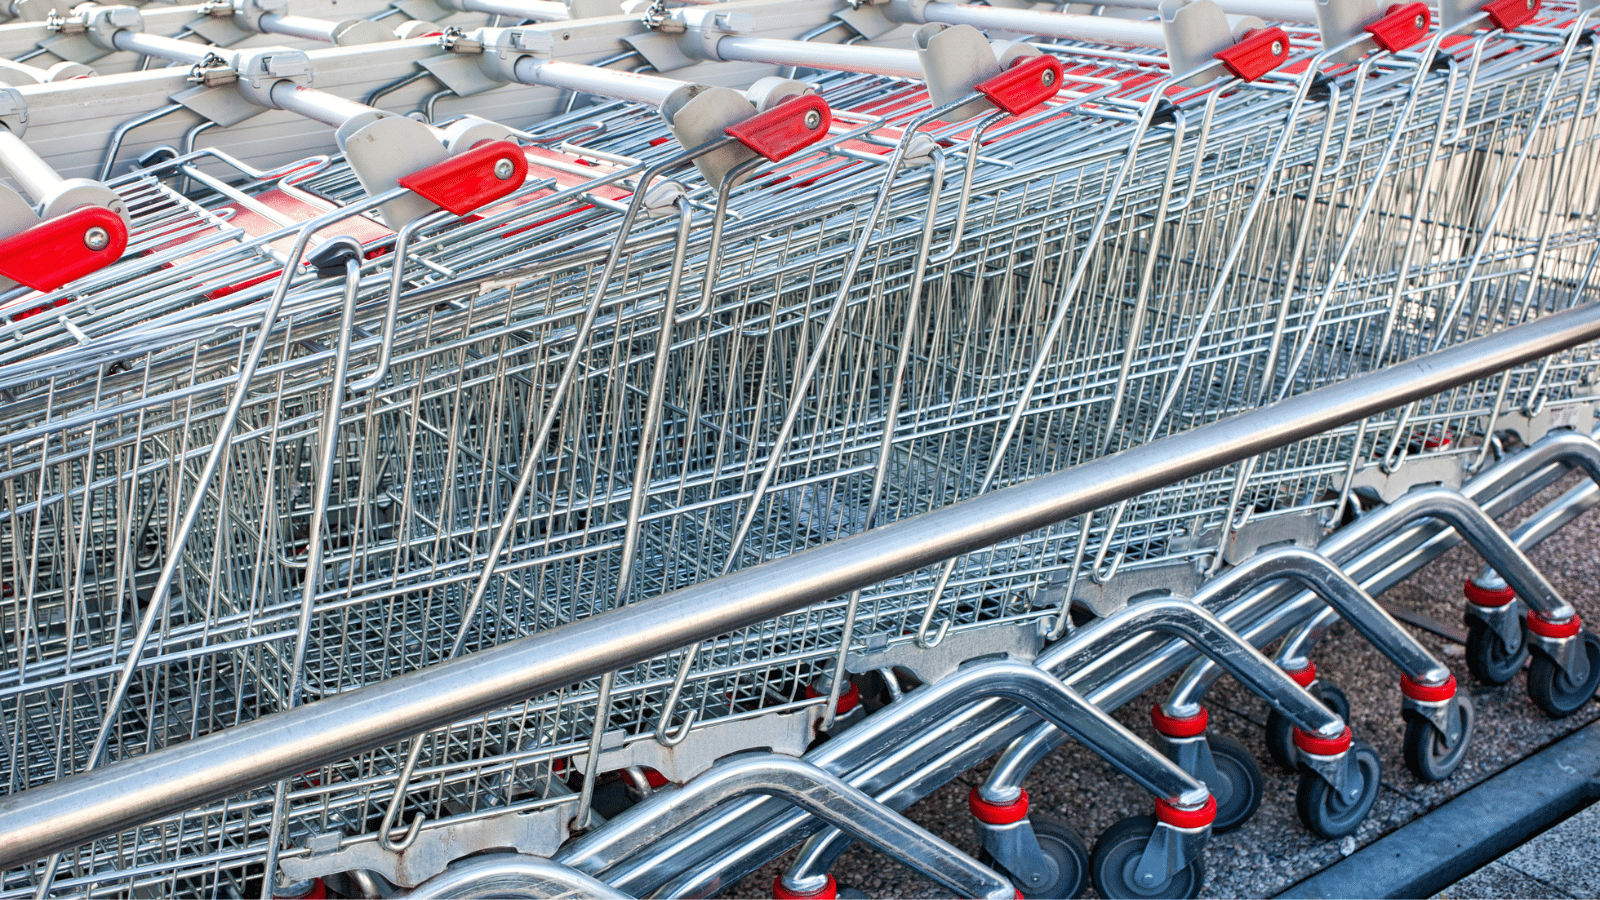 Shopping carts in a corral